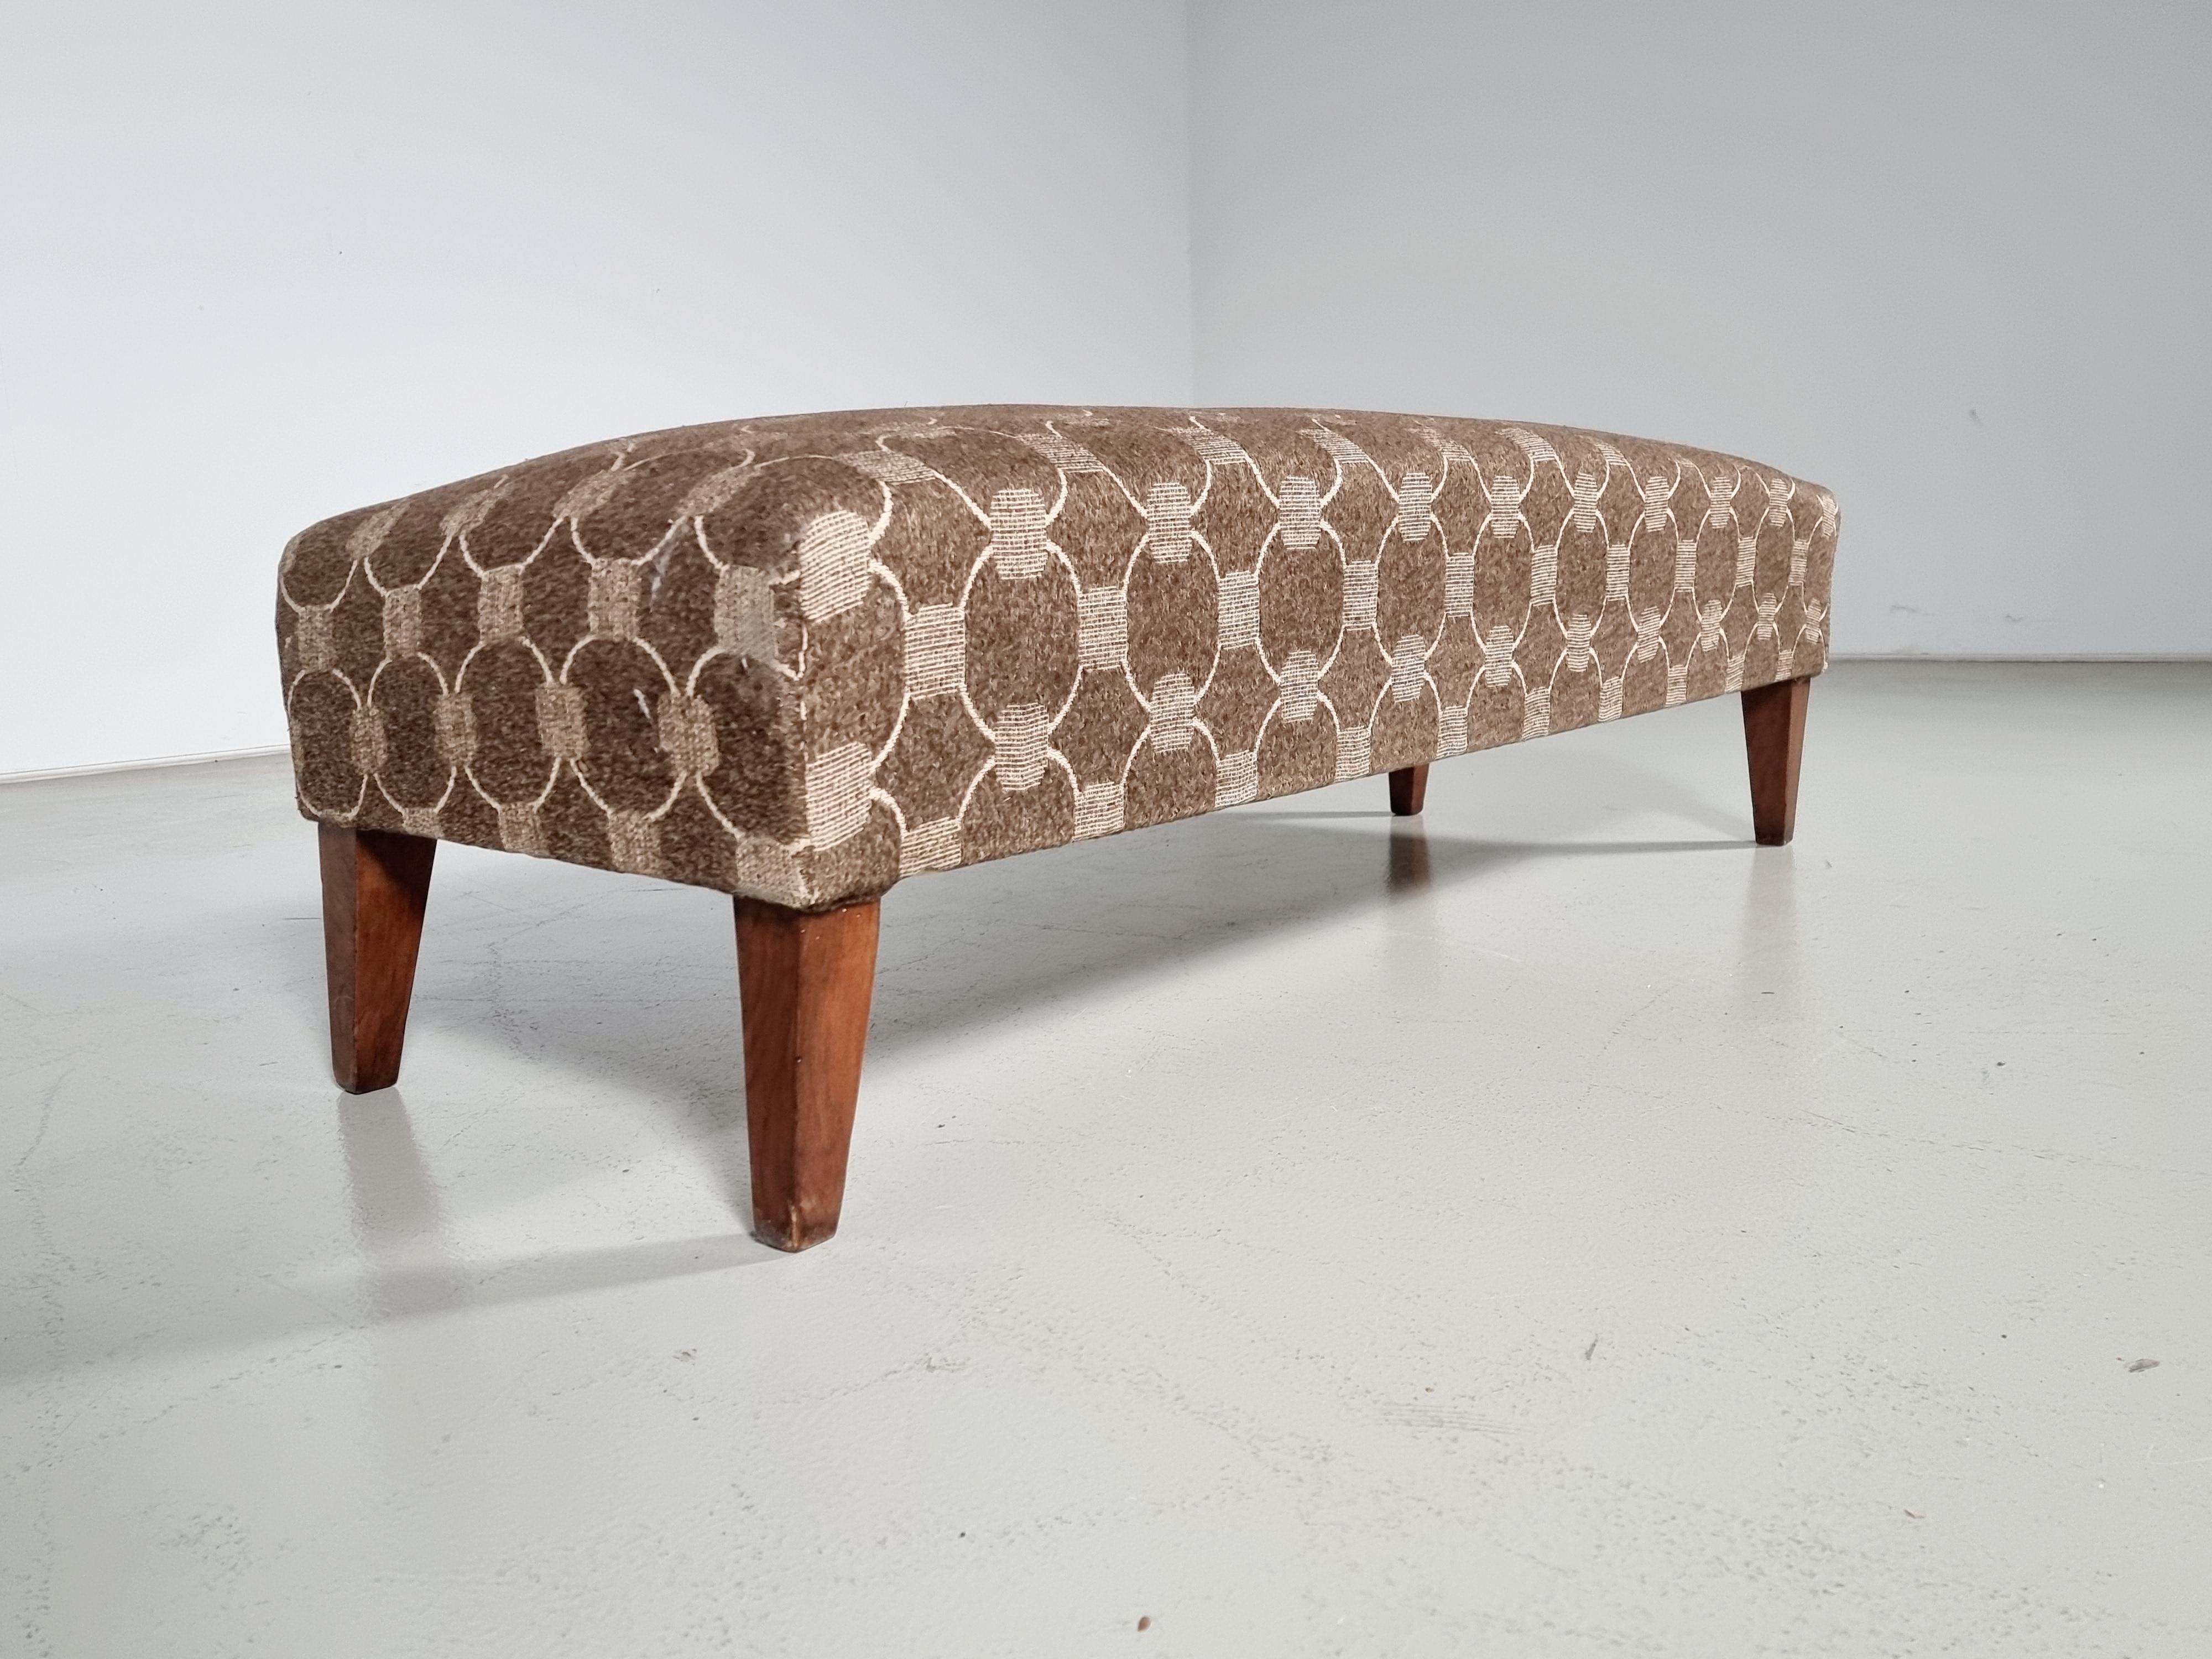 Magnificent bench in the manner of the great Architect Gio Ponti, 1950''s. The bench has the original fabric and is in very good condition. it will fit perfectly in any type of lounge or bedroom but one that is obviously upscale.

We think its an